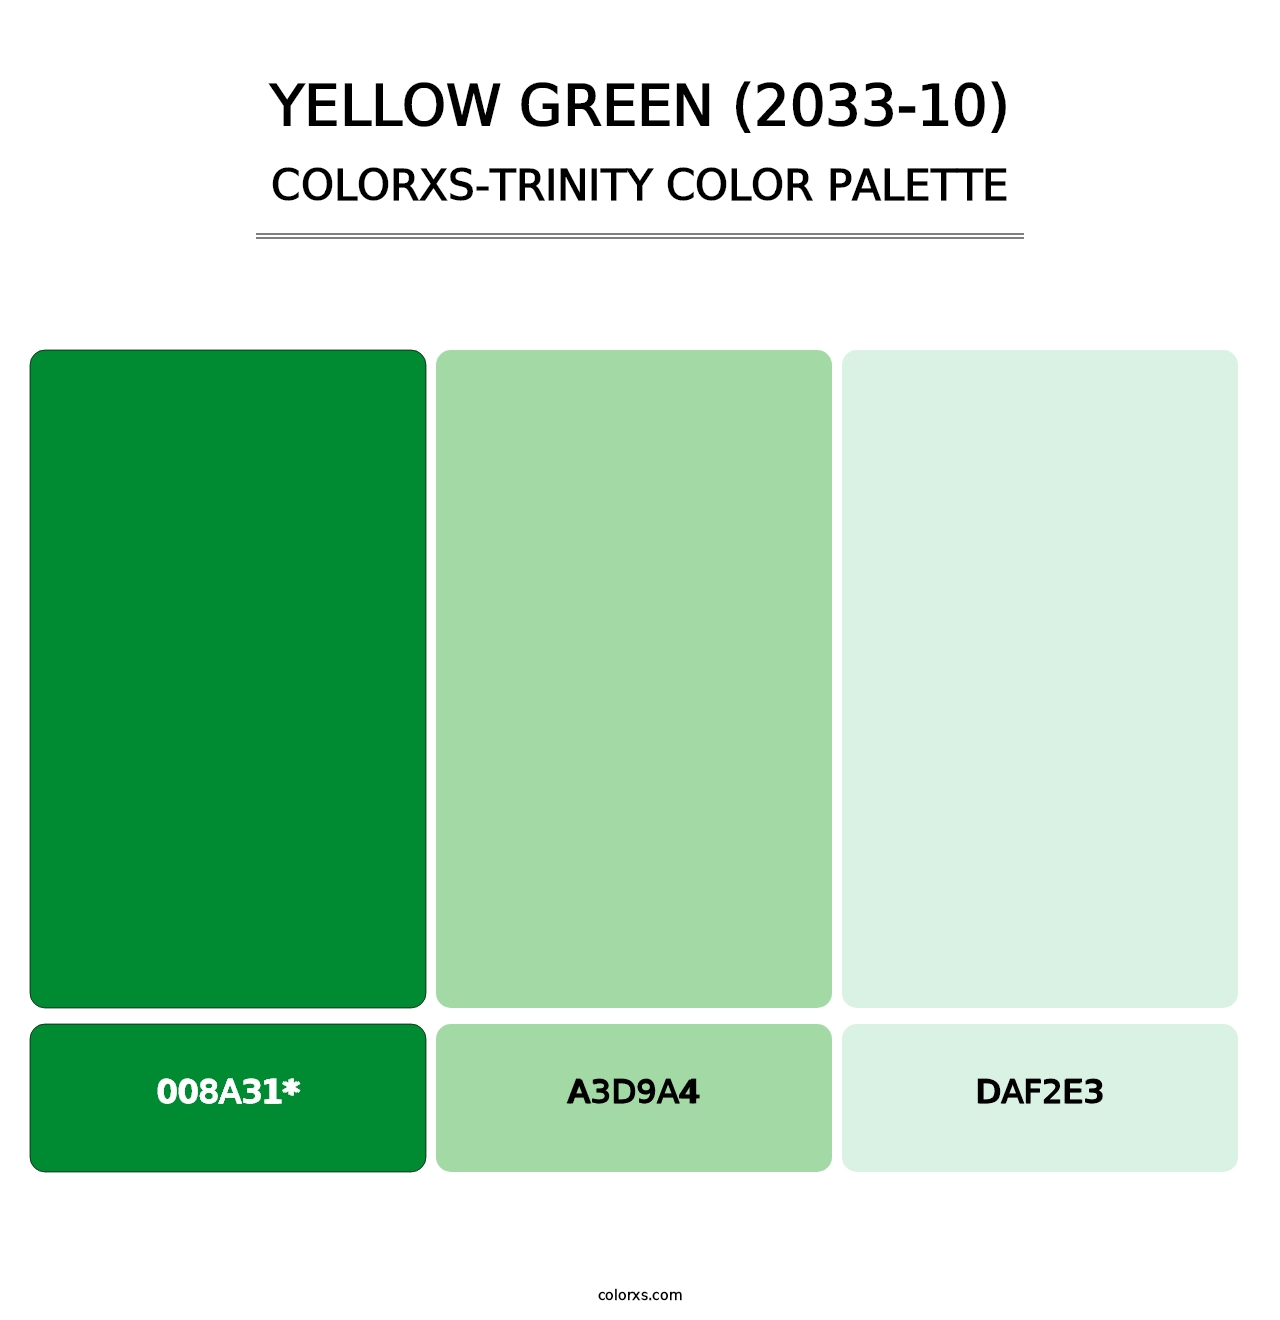 Yellow Green (2033-10) - Colorxs Trinity Palette